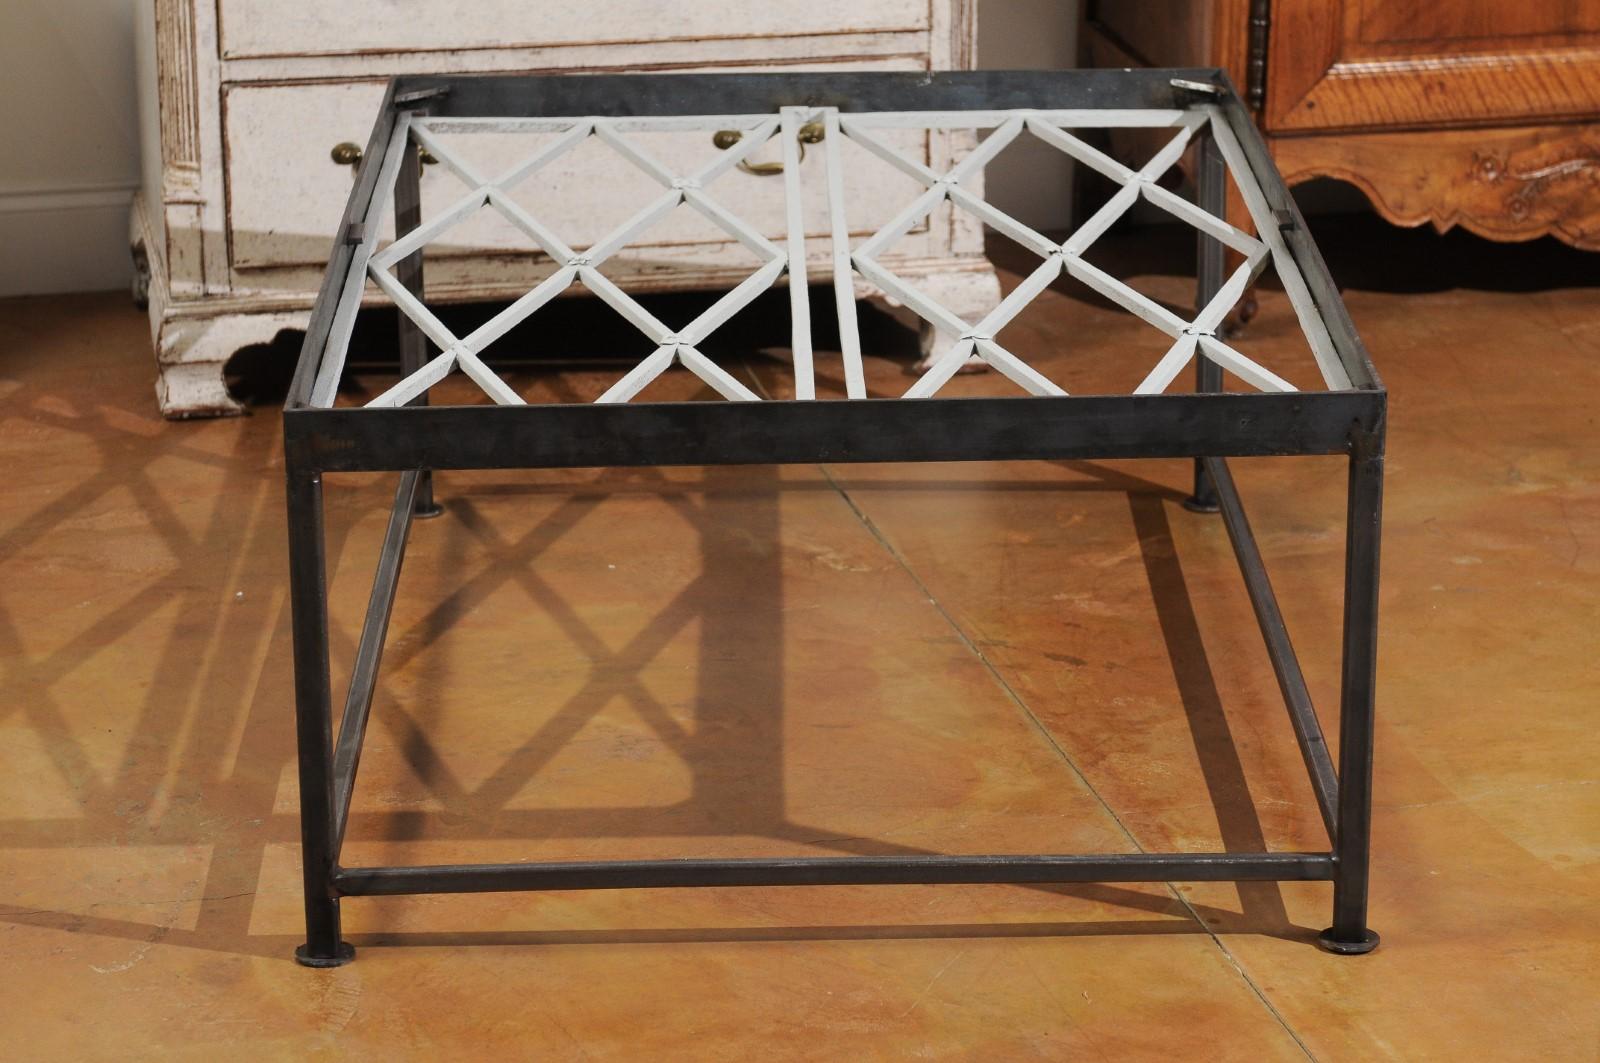 French Contemporary Coffee Table Made from 18th Century Cast Iron Railings 1